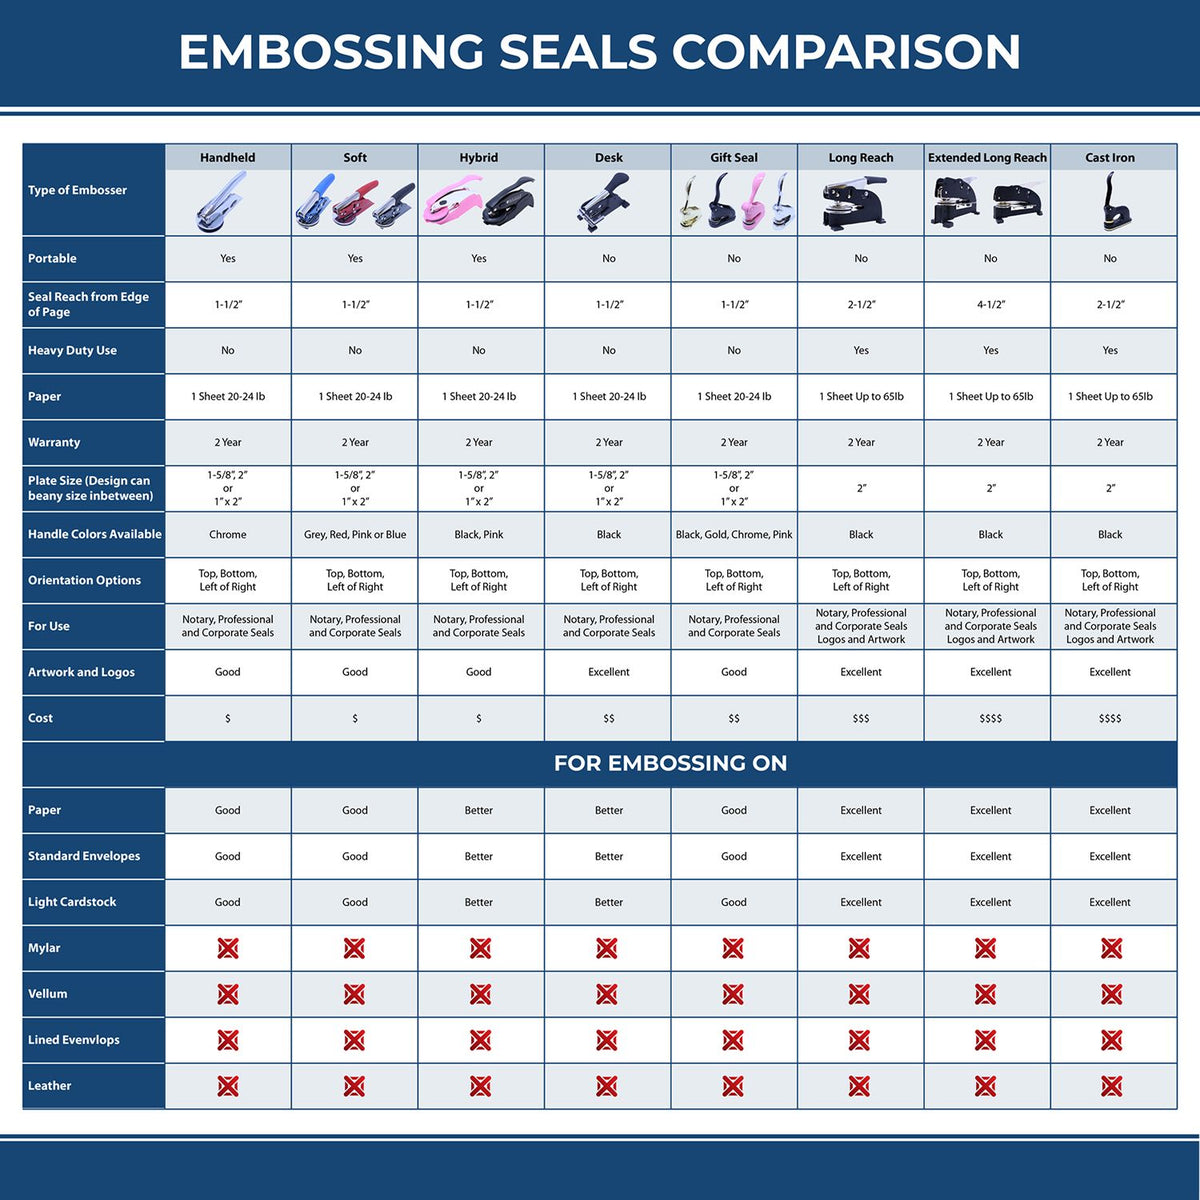 A comparison chart for the different types of mount models available for the State of Georgia Soft Land Surveyor Embossing Seal.